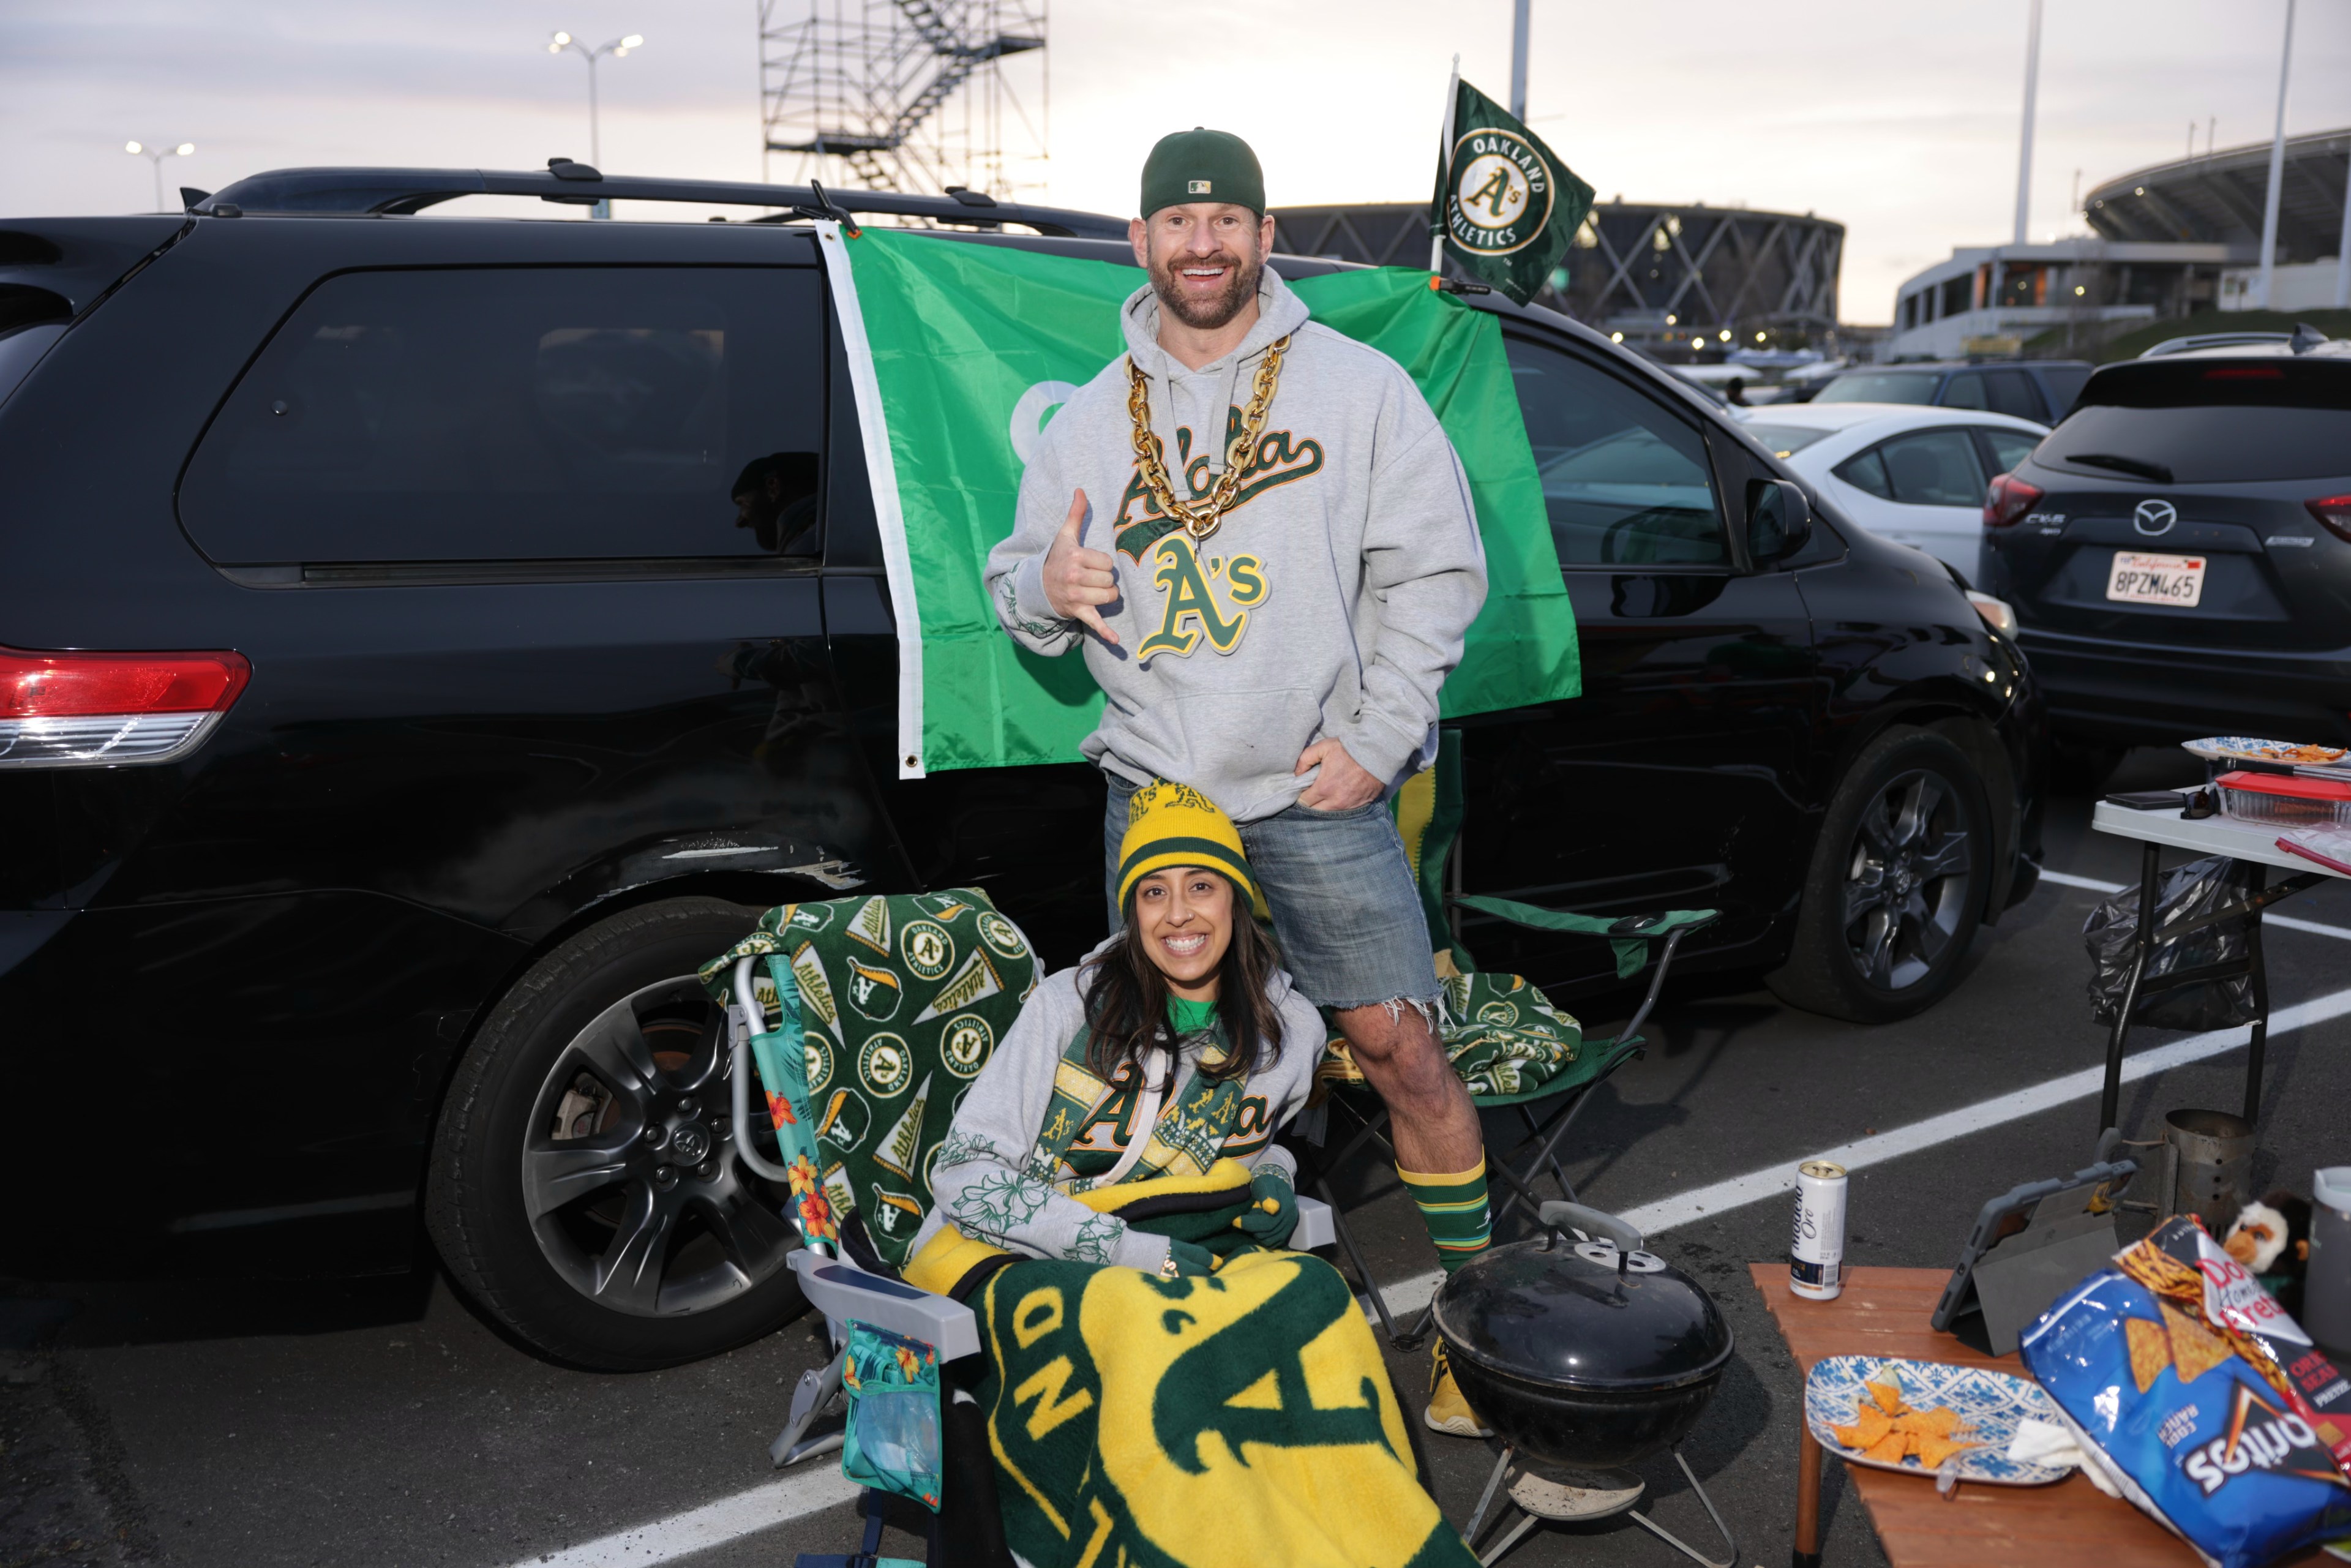 Two fans in Oakland Athletics gear tailgating by their car, with a grill, snacks, and stadium in the background.